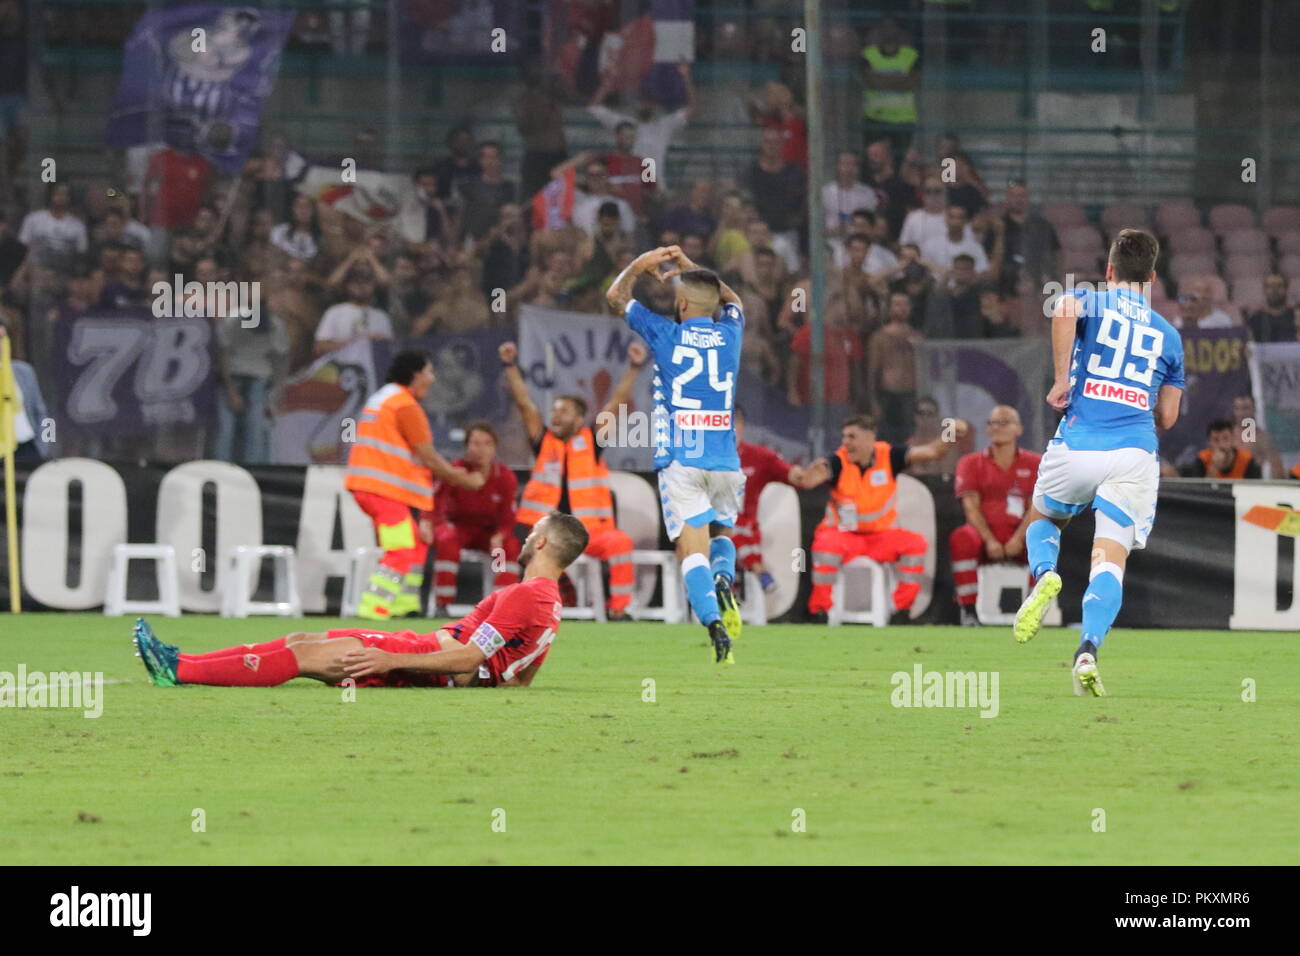 Naples, Italy. 15th September 2018. In the picture the Napoli player Lorenzo Insigne celebrates the goal made to Fiorentina.Stadium San Paolo Naples. 15th Sep, 2018. 09/15/2018 - Italy.final result SSC Napoli 1 AC Fiorentina 0. Credit: Fabio Sasso/ZUMA Wire/Alamy Live News Stock Photo